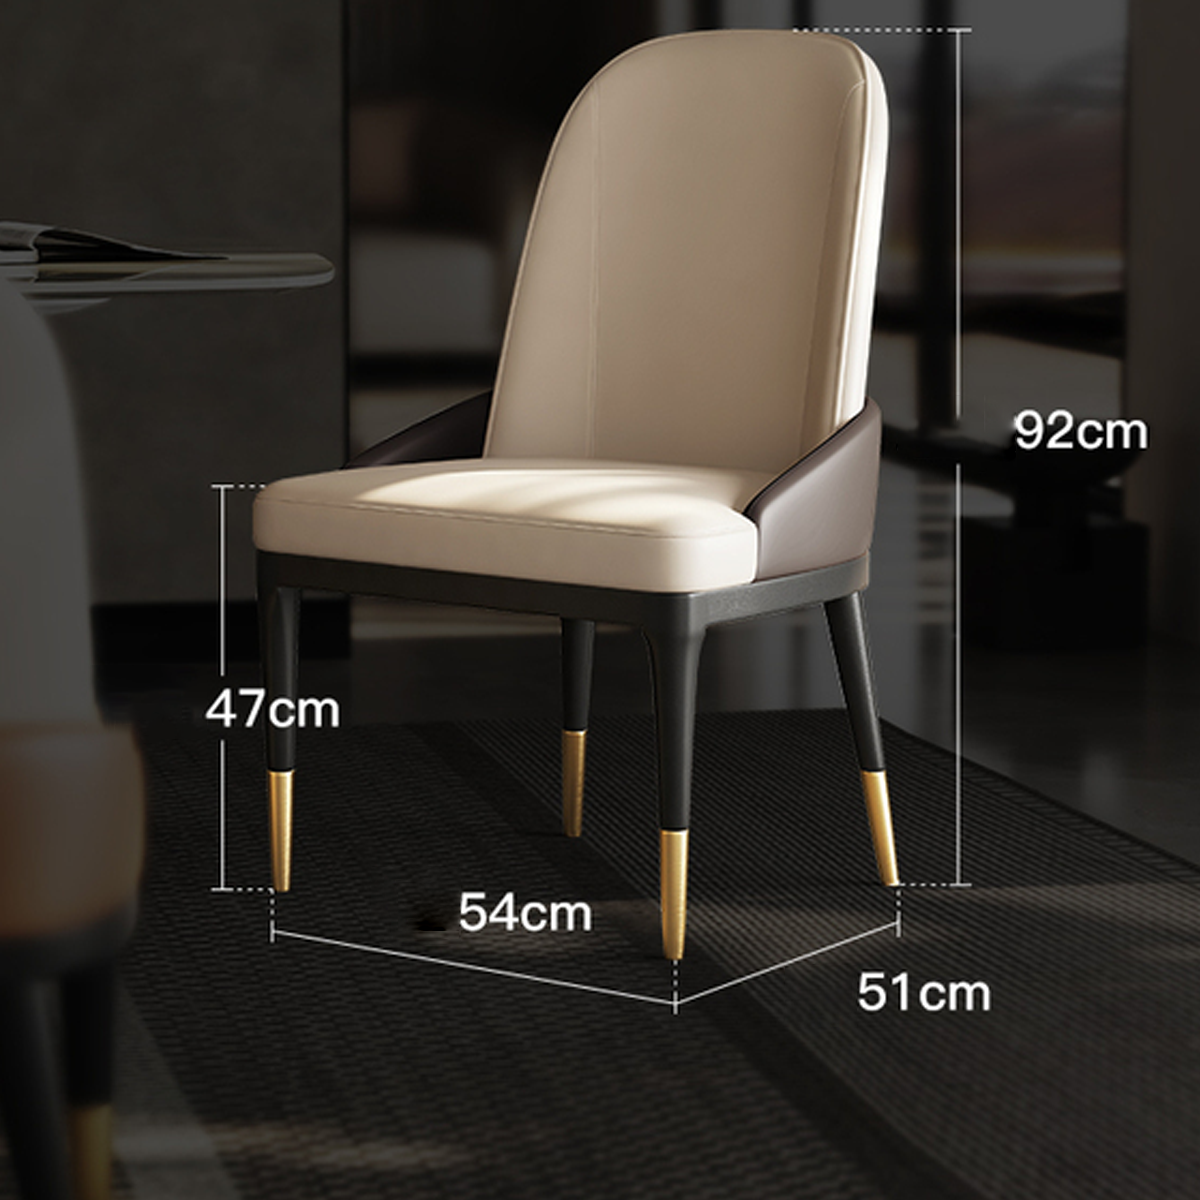 Dining chair 50×50 cm - MADE74